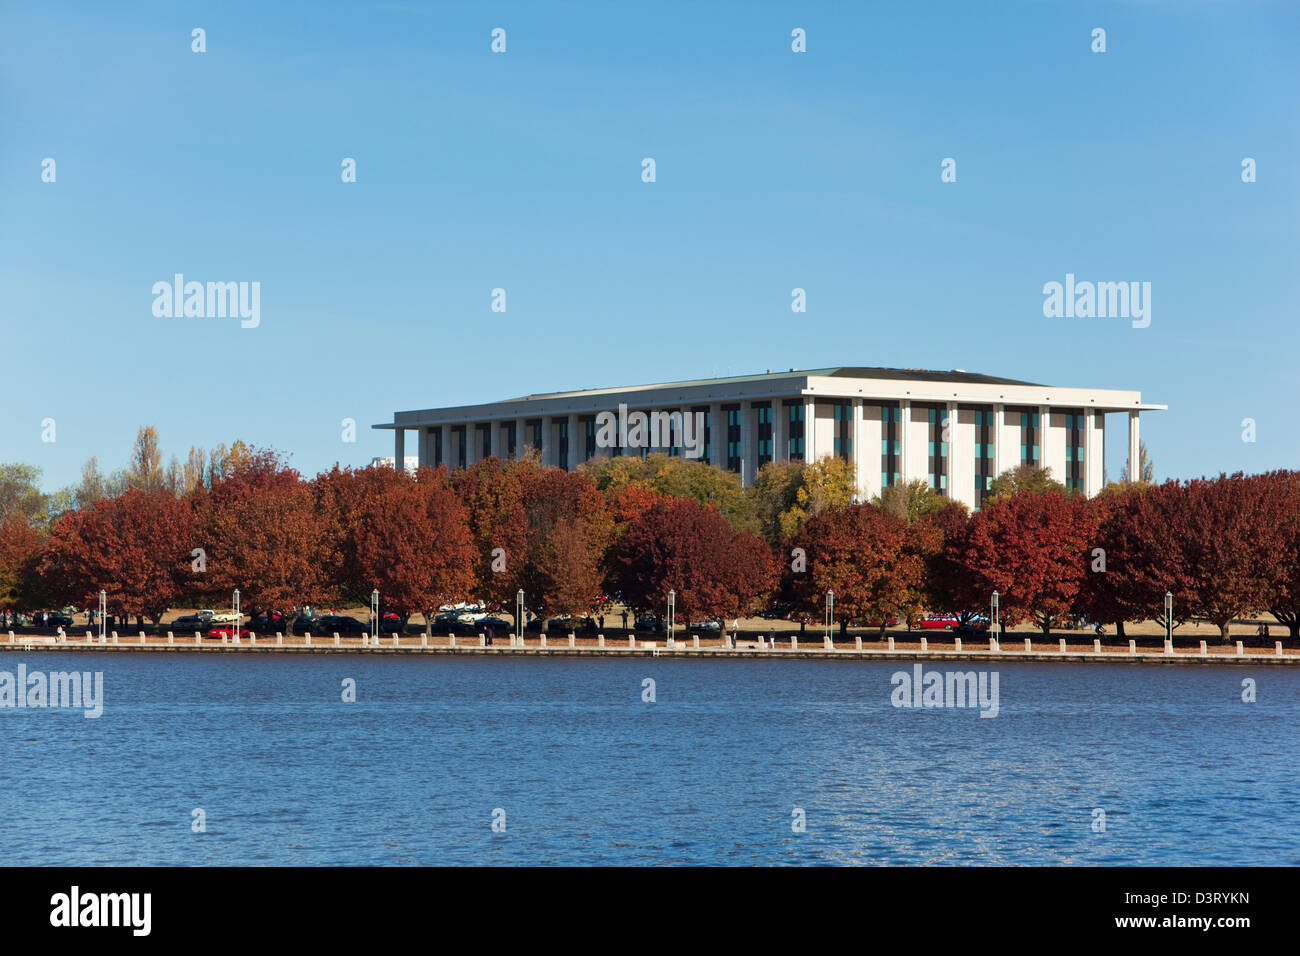 View across Lake Burley Griffin to the National Library of Australia. Canberra, Australian Capital Territory (ACT), Australia Stock Photo